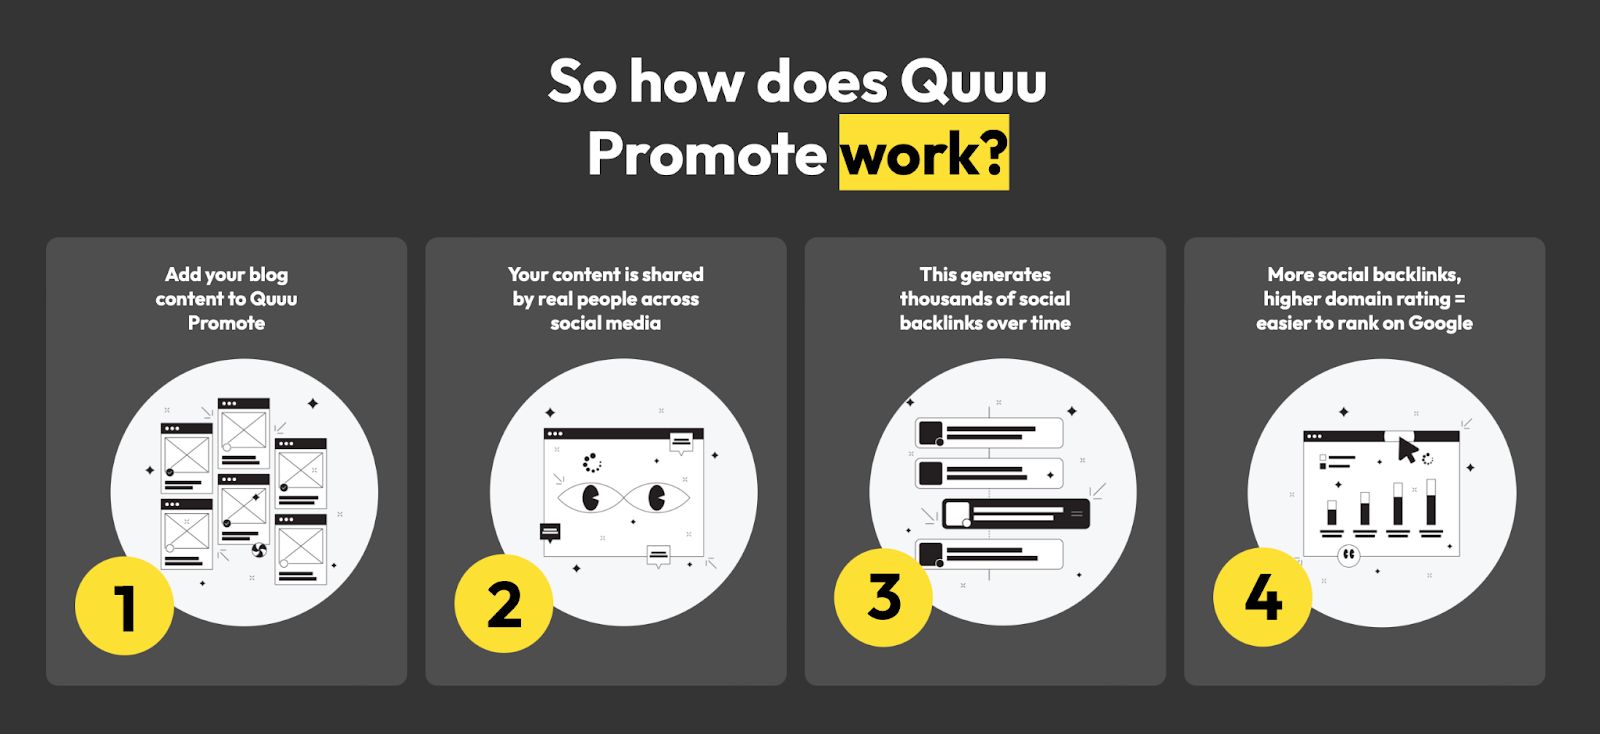 The image shows four steps with the heading "So how does Quuu Promote work?". Step 1 is to "Add your blog content to Quuu Promote", step 2 is "Your content is shared by real people across social media", step 3 is "This generates thousands of social backlinks over time", and finally step 4 is "More social backlinks, higher domain rating = easier to rank on Google". 